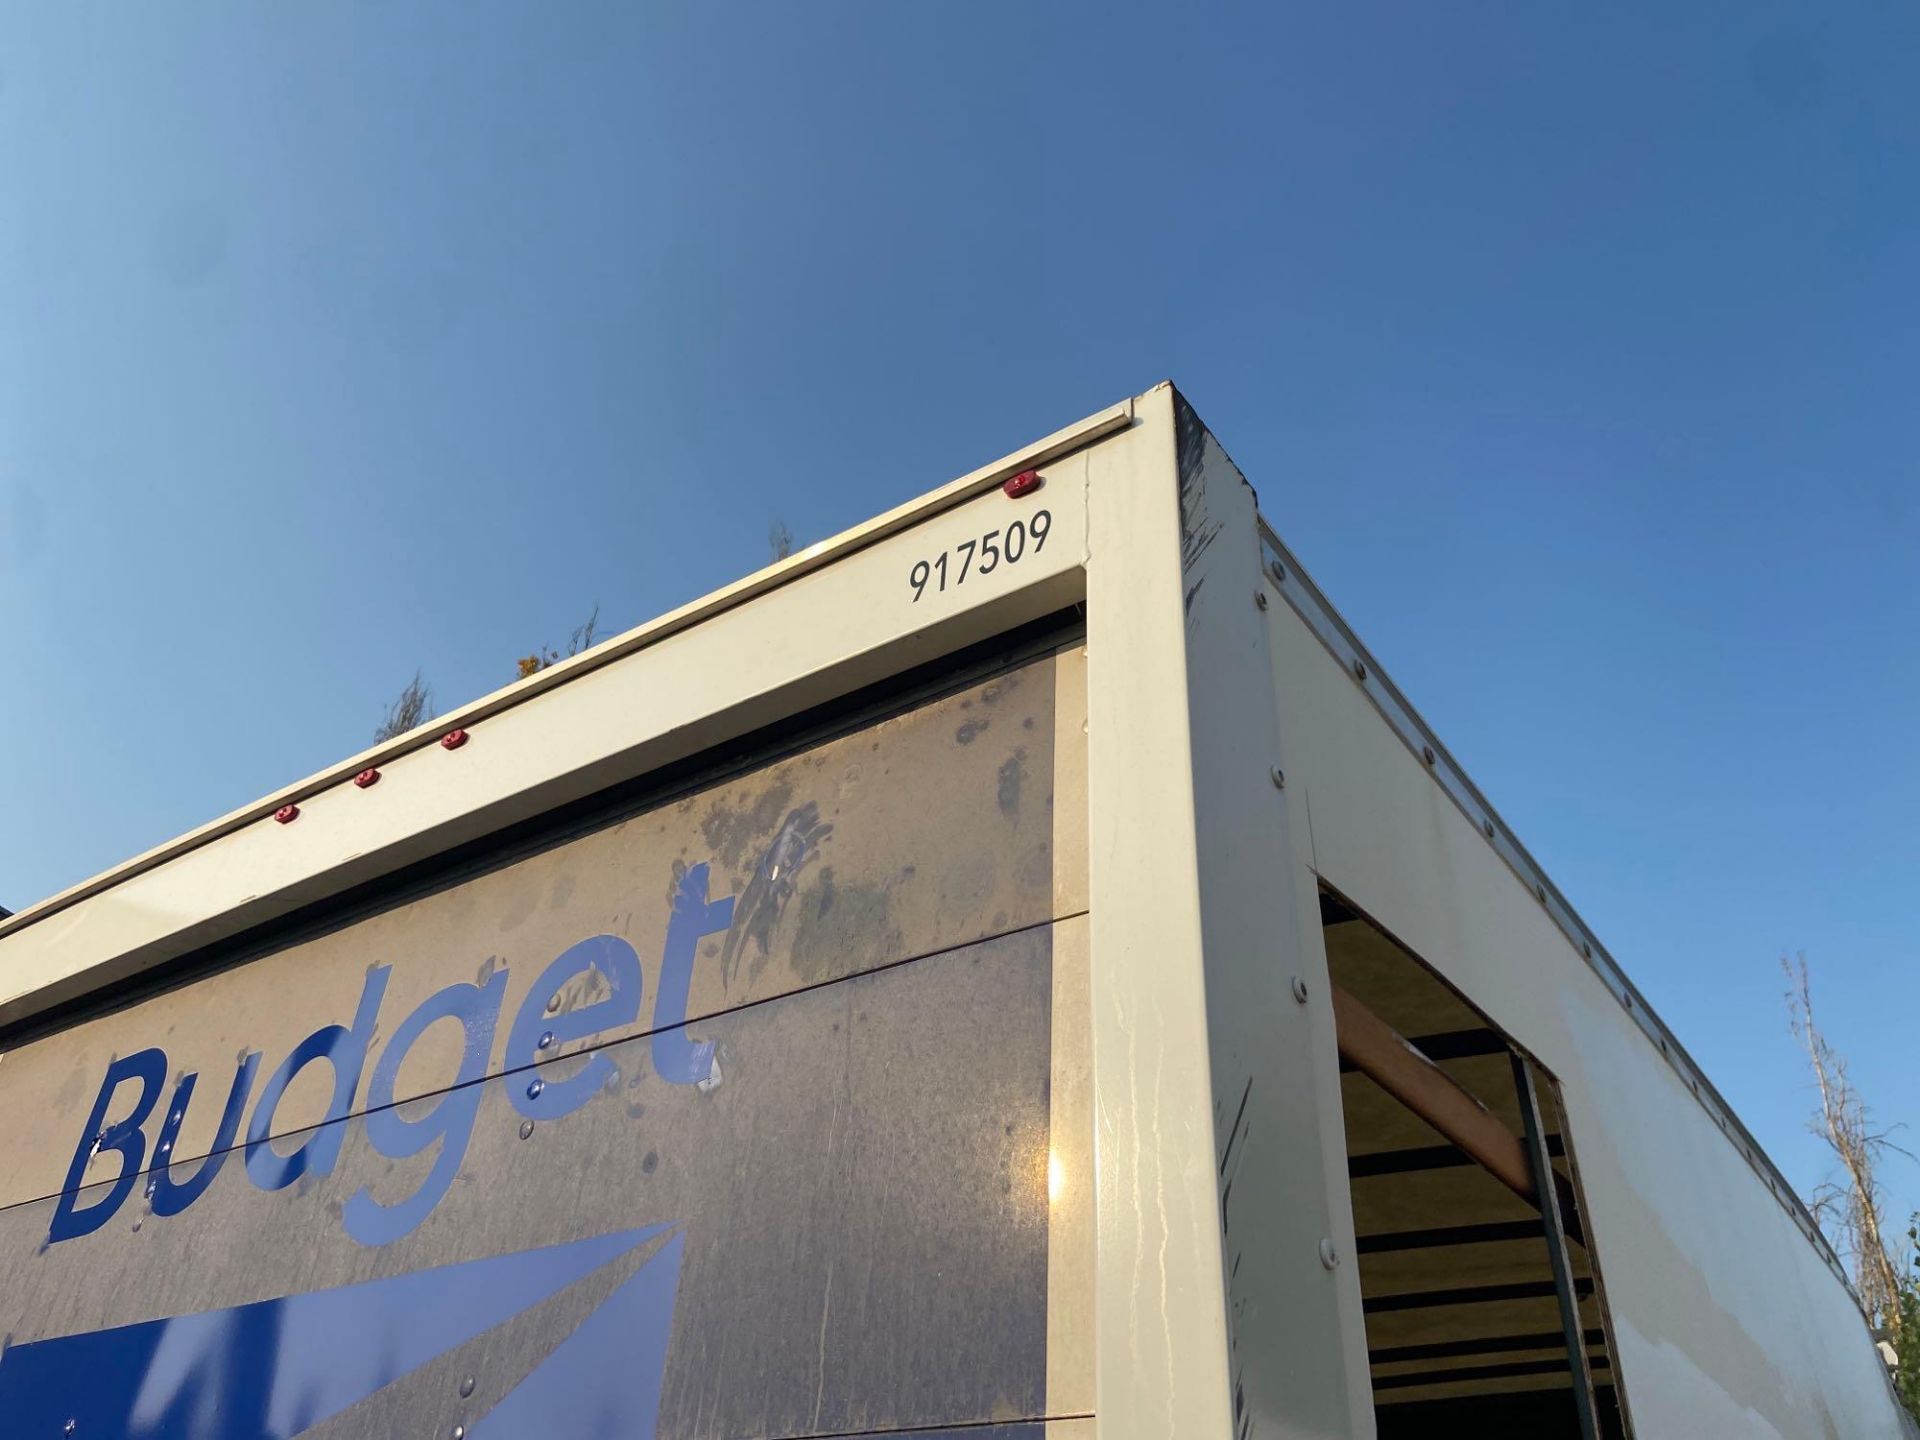 2019 Ford E-350 16ft Box Truck - Image 35 of 49